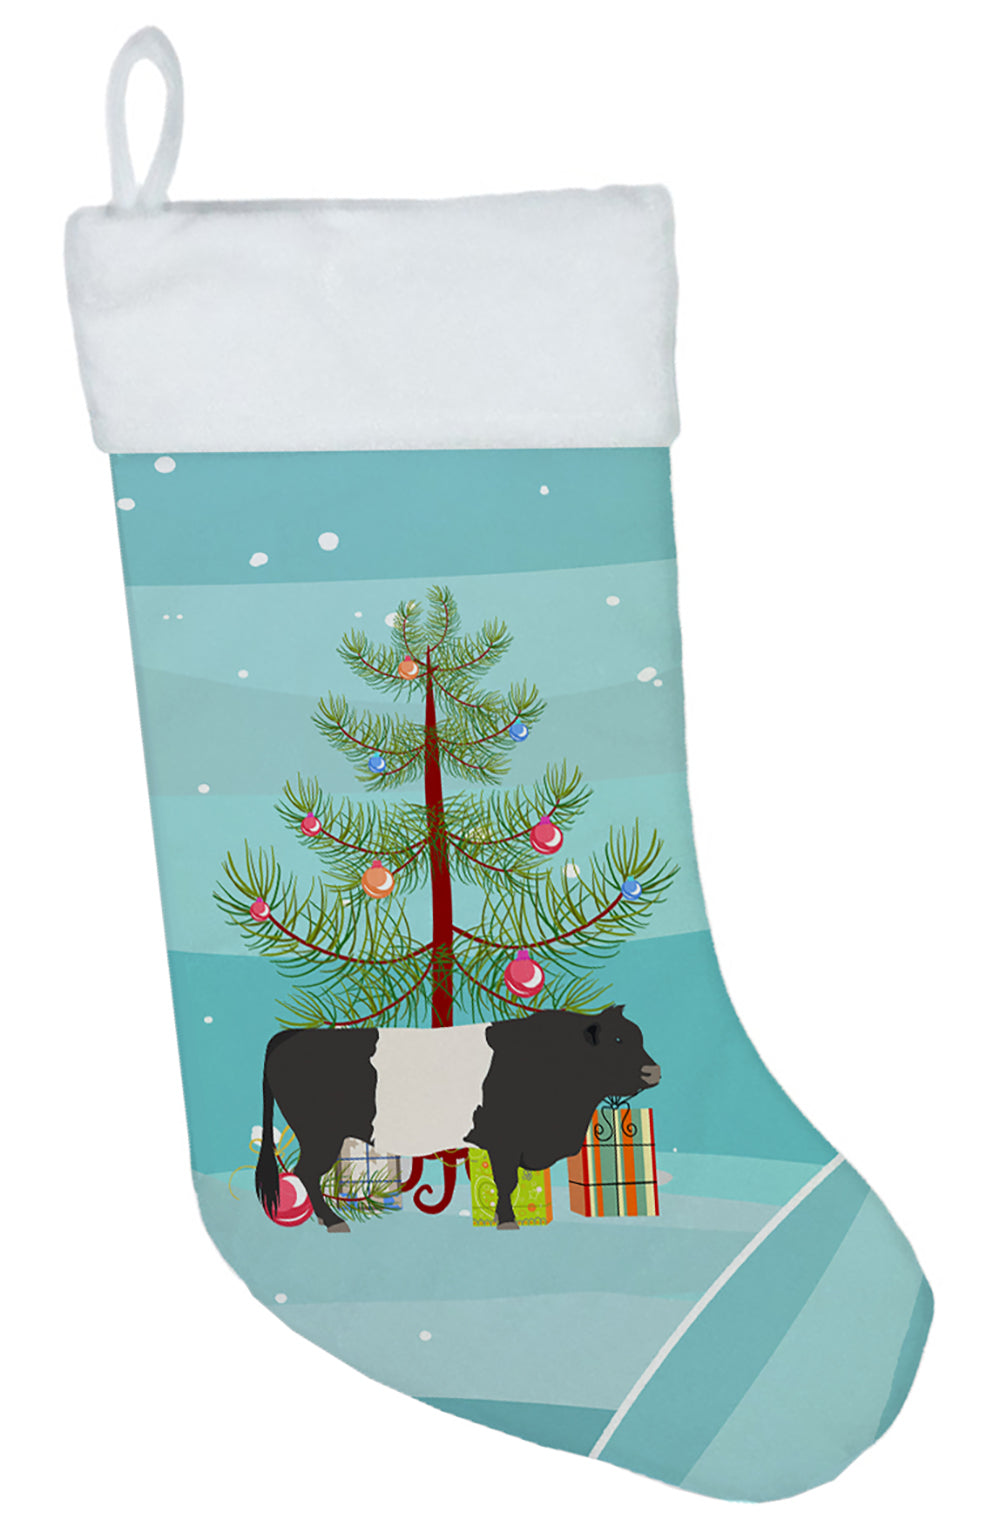 Belted Galloway Cow Christmas Christmas Stocking BB9198CS  the-store.com.